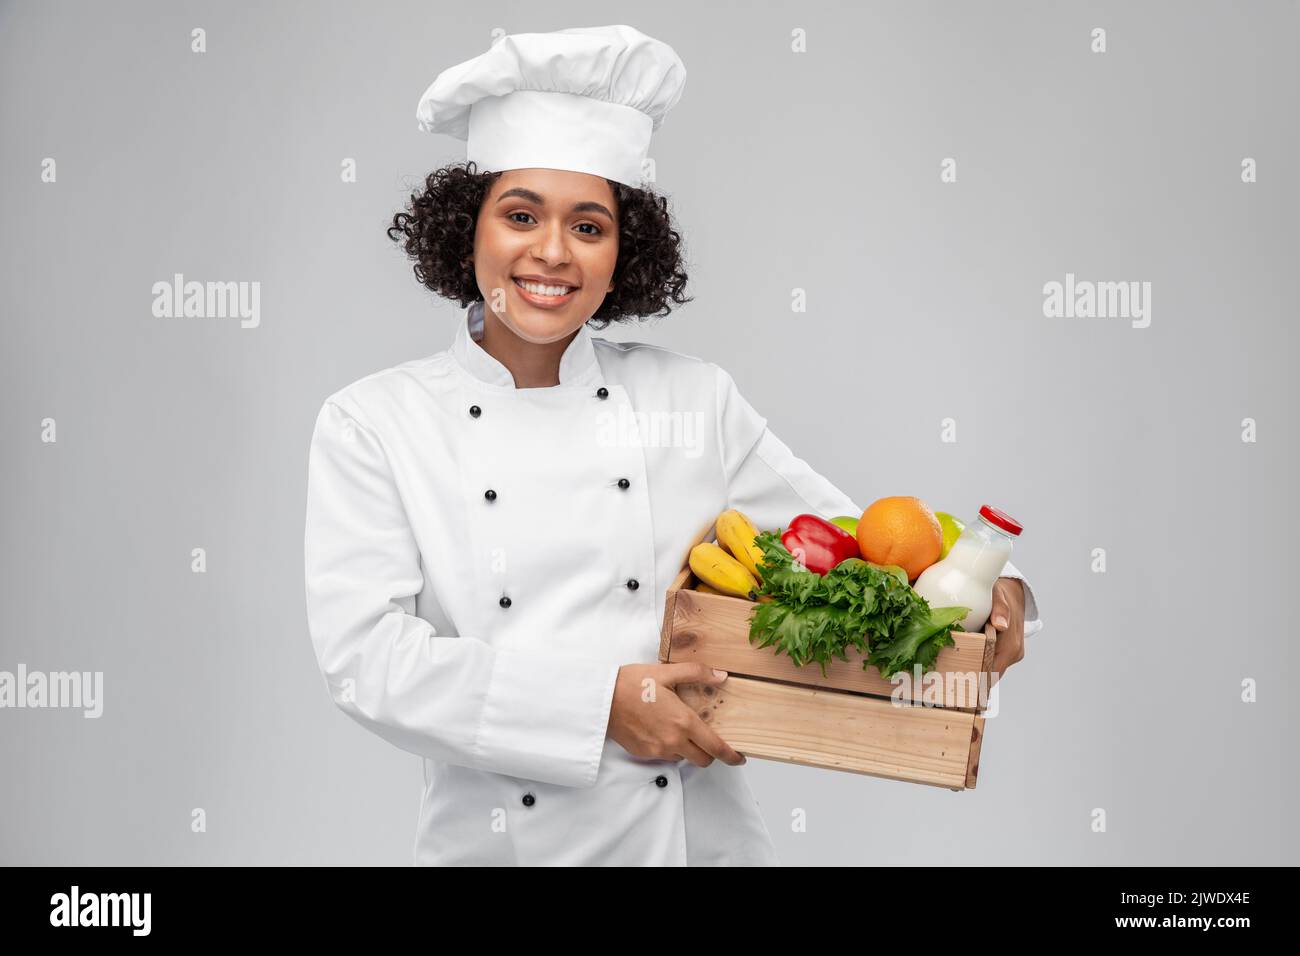 happy smiling female chef with food in wooden box Stock Photo